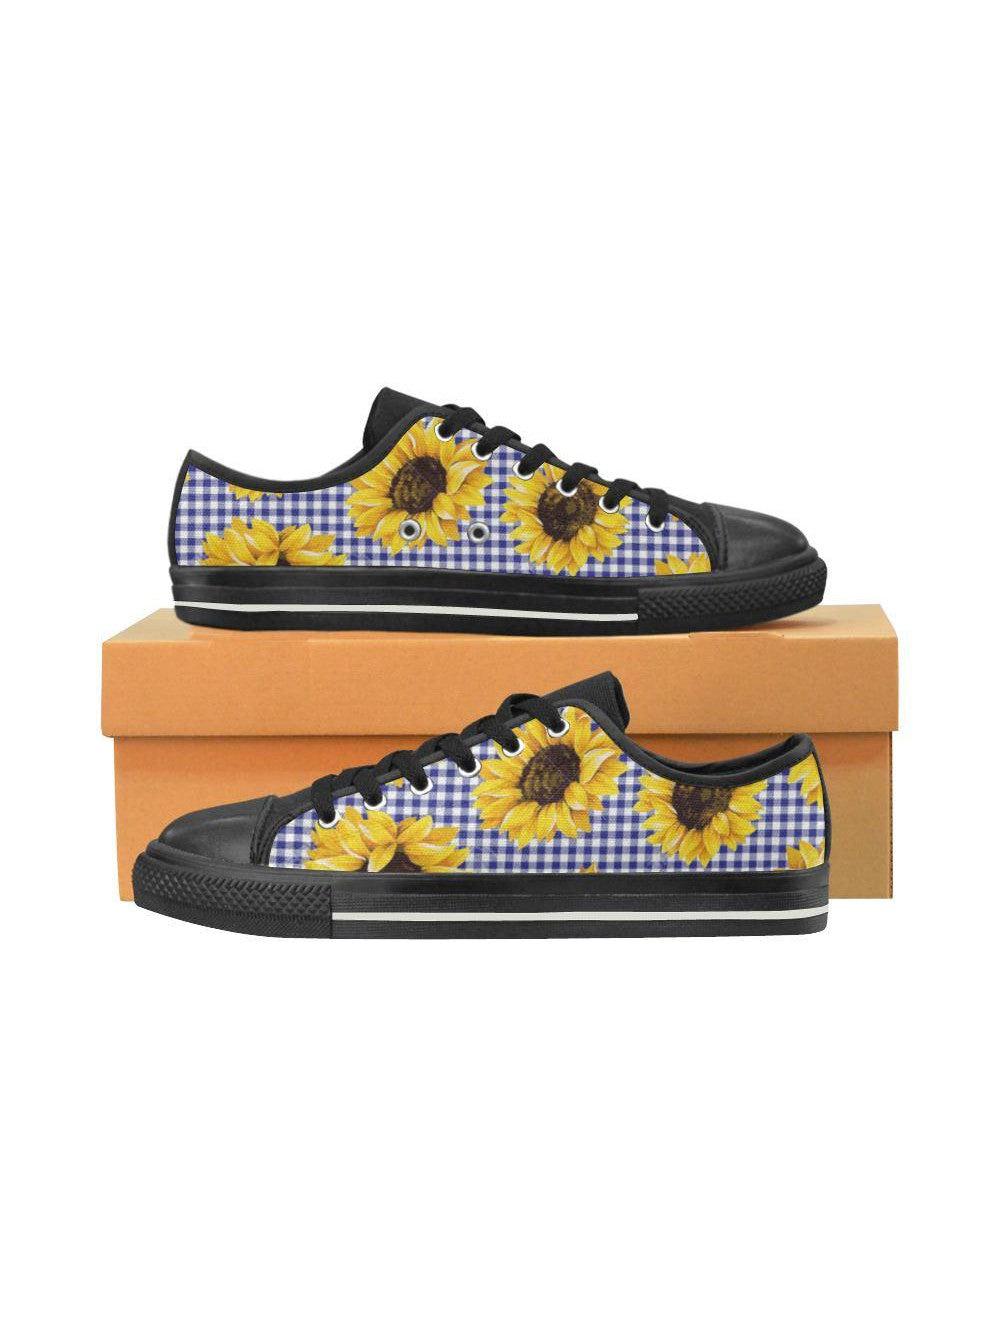 SUNFLOWERS GINGHAM Kid's Canvas Sneakers